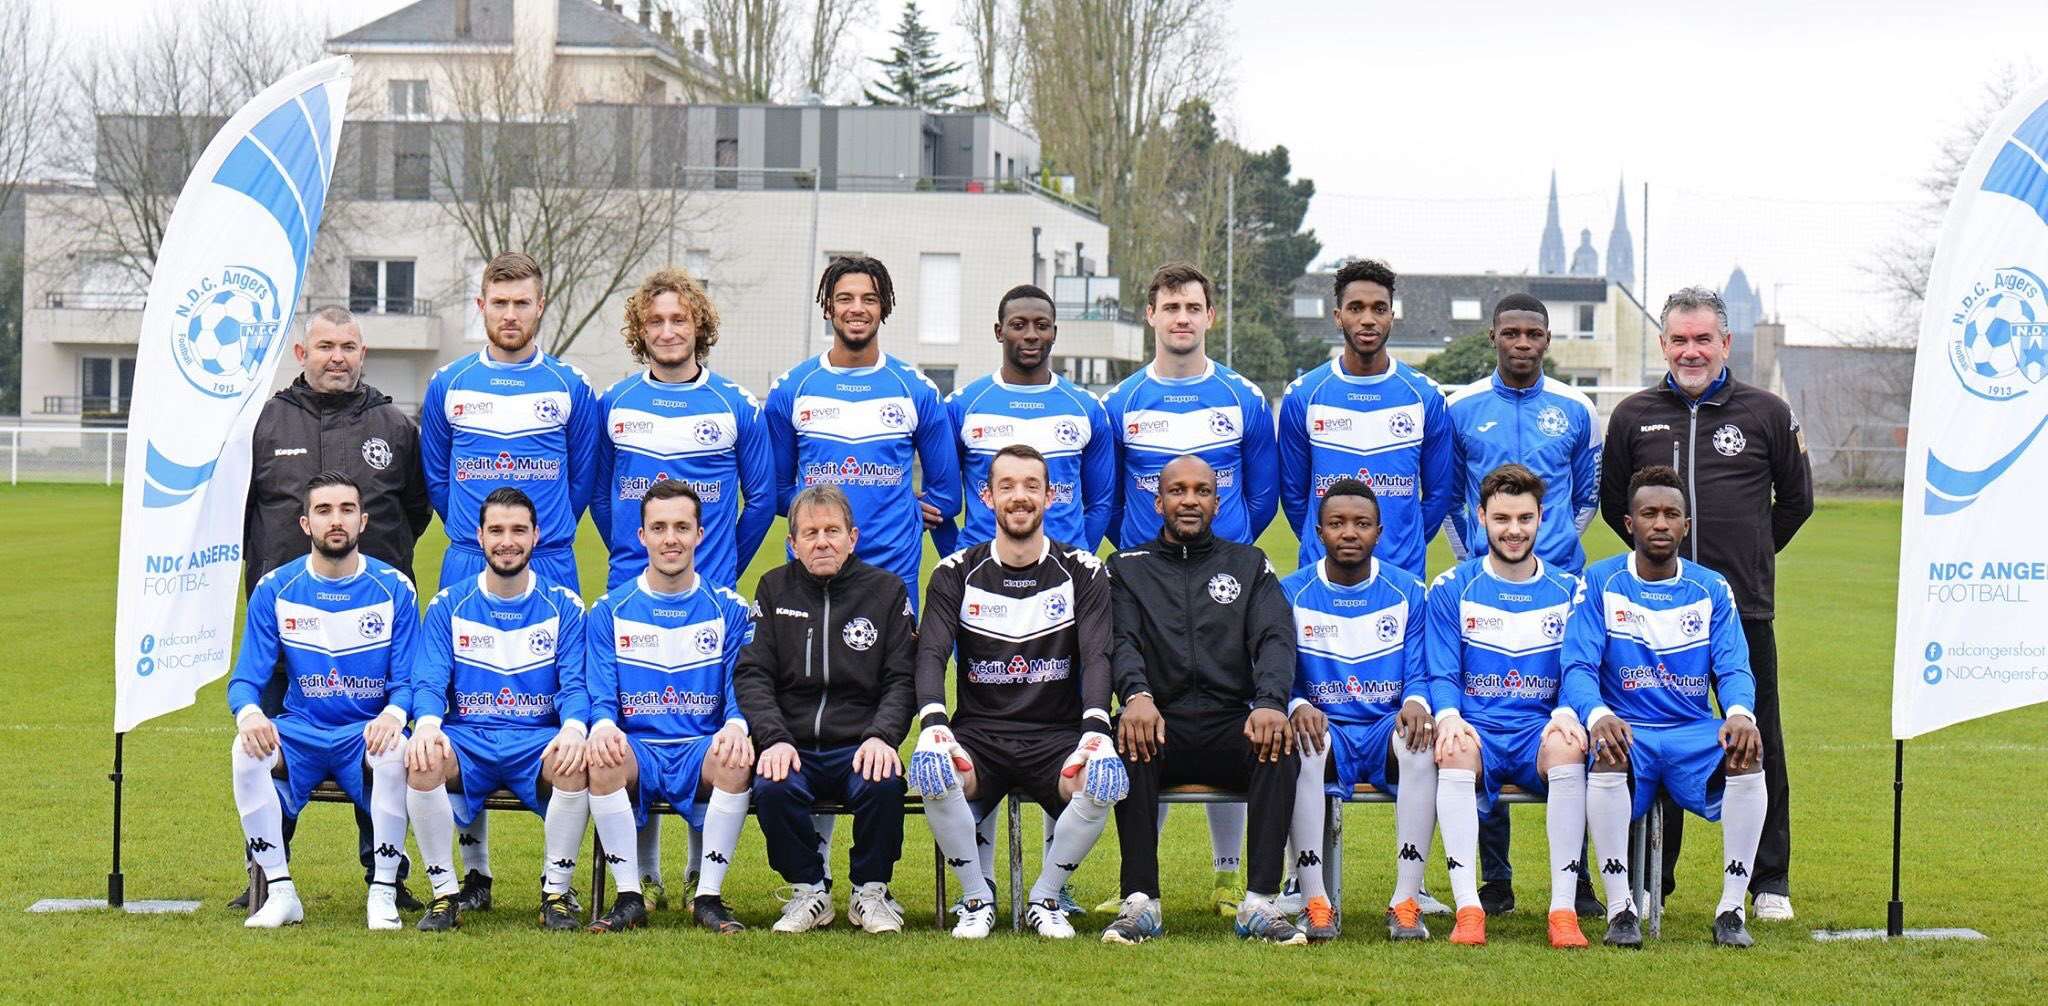 ndc-angers-10-football-club-facts